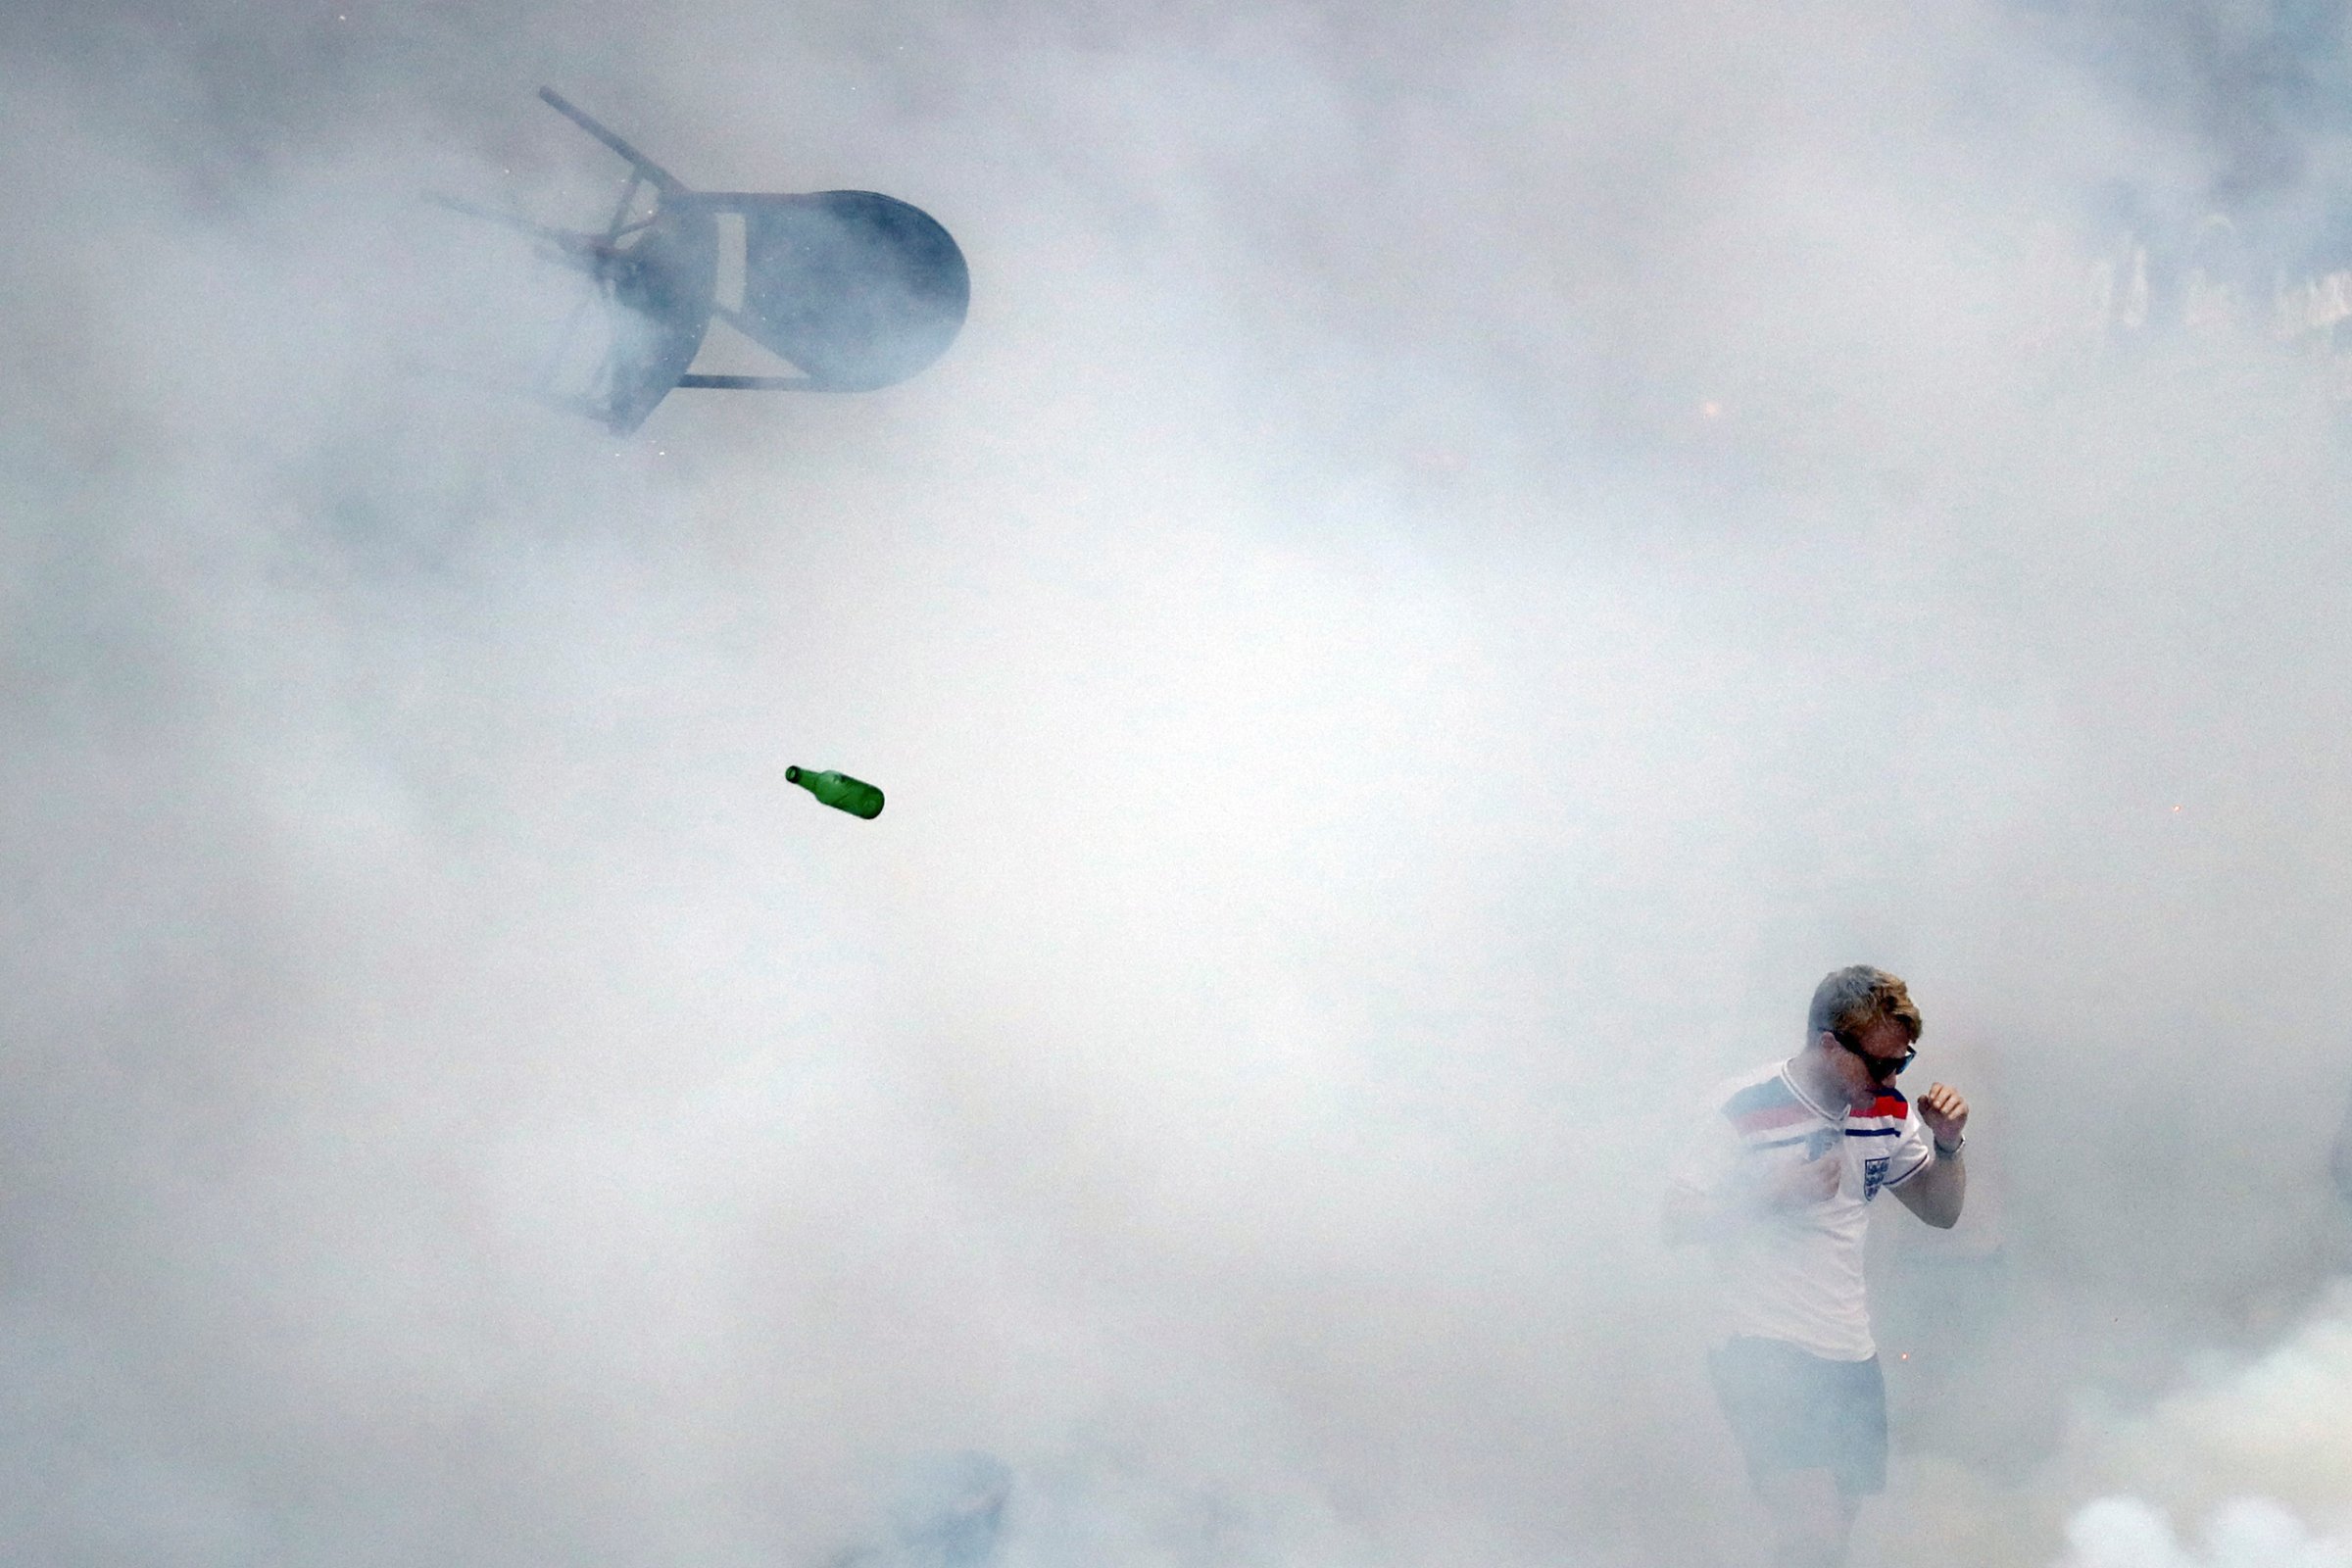 A bottle and chair are thrown as an England fan walks through tear gas as England fans clash with police in Marseille, France, on June 10, 2016.